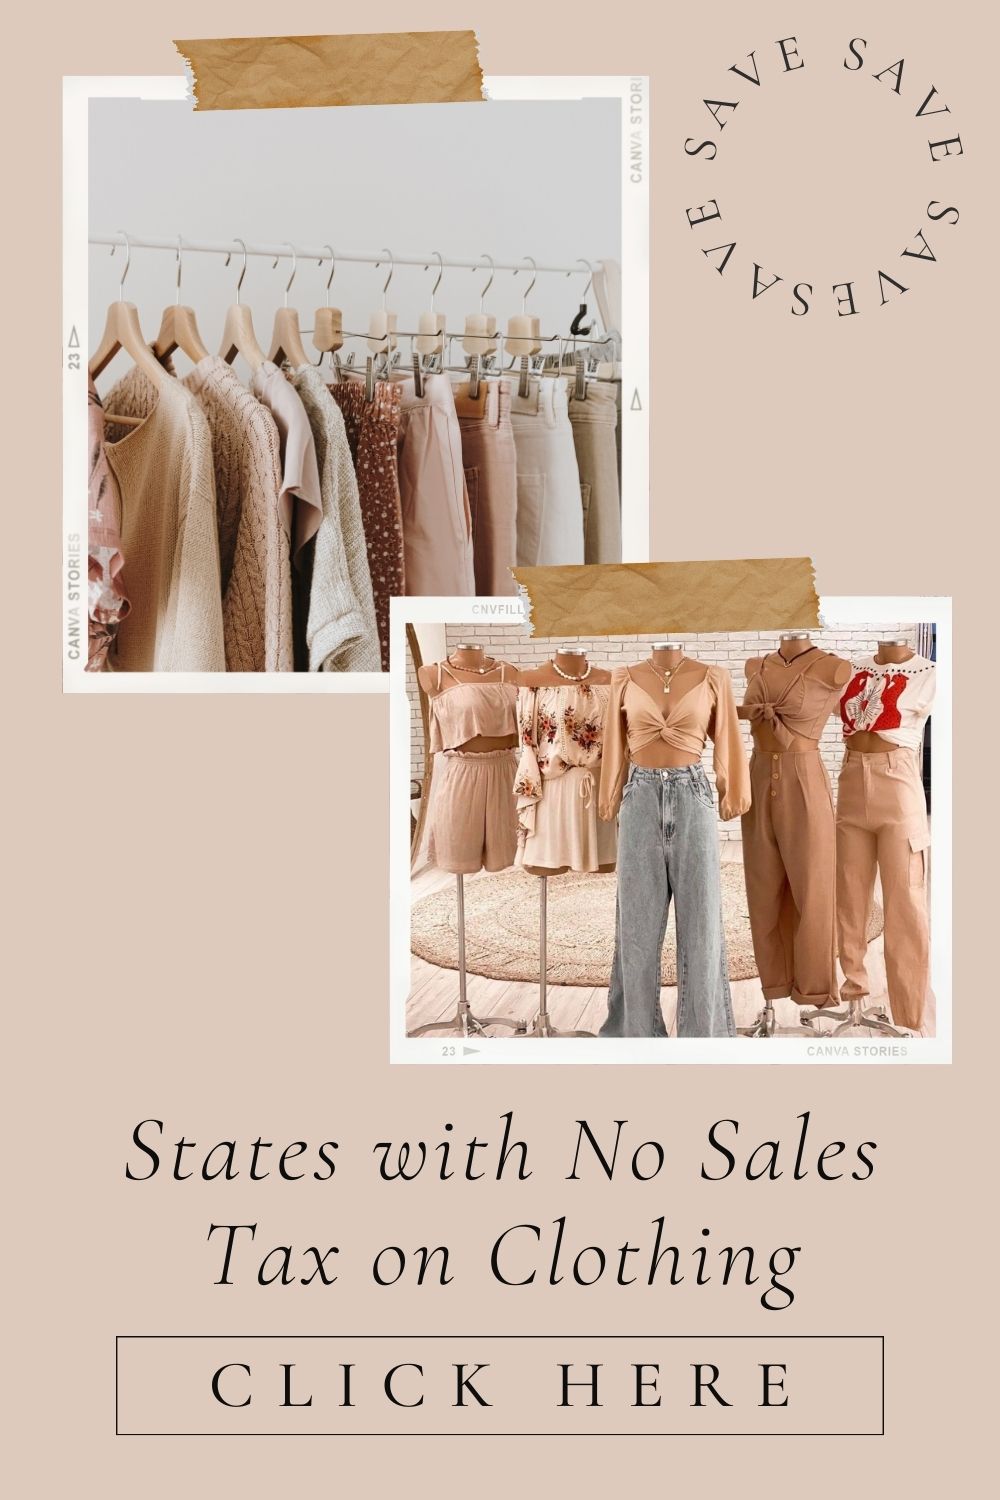 How to Pay No Sales Tax on Clothing